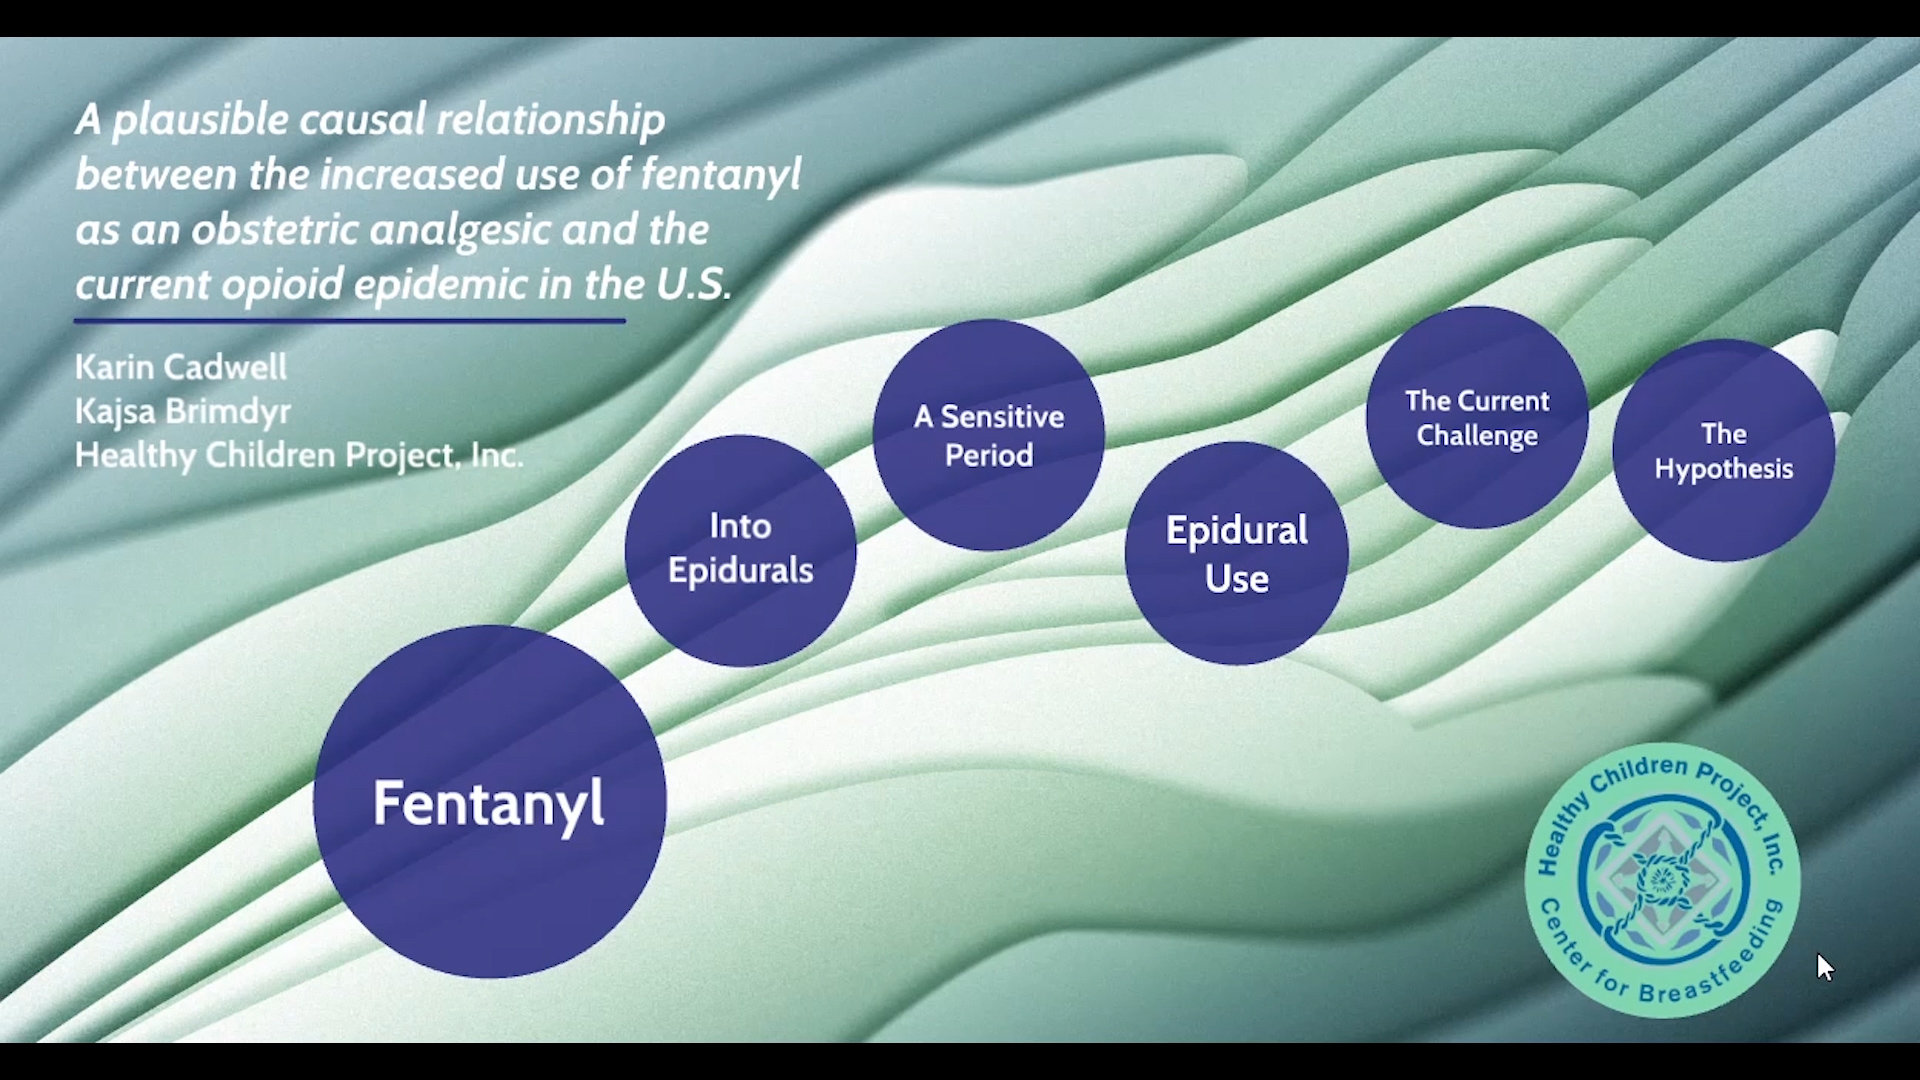 Fentanyl: A Plausible Causal Relationship image